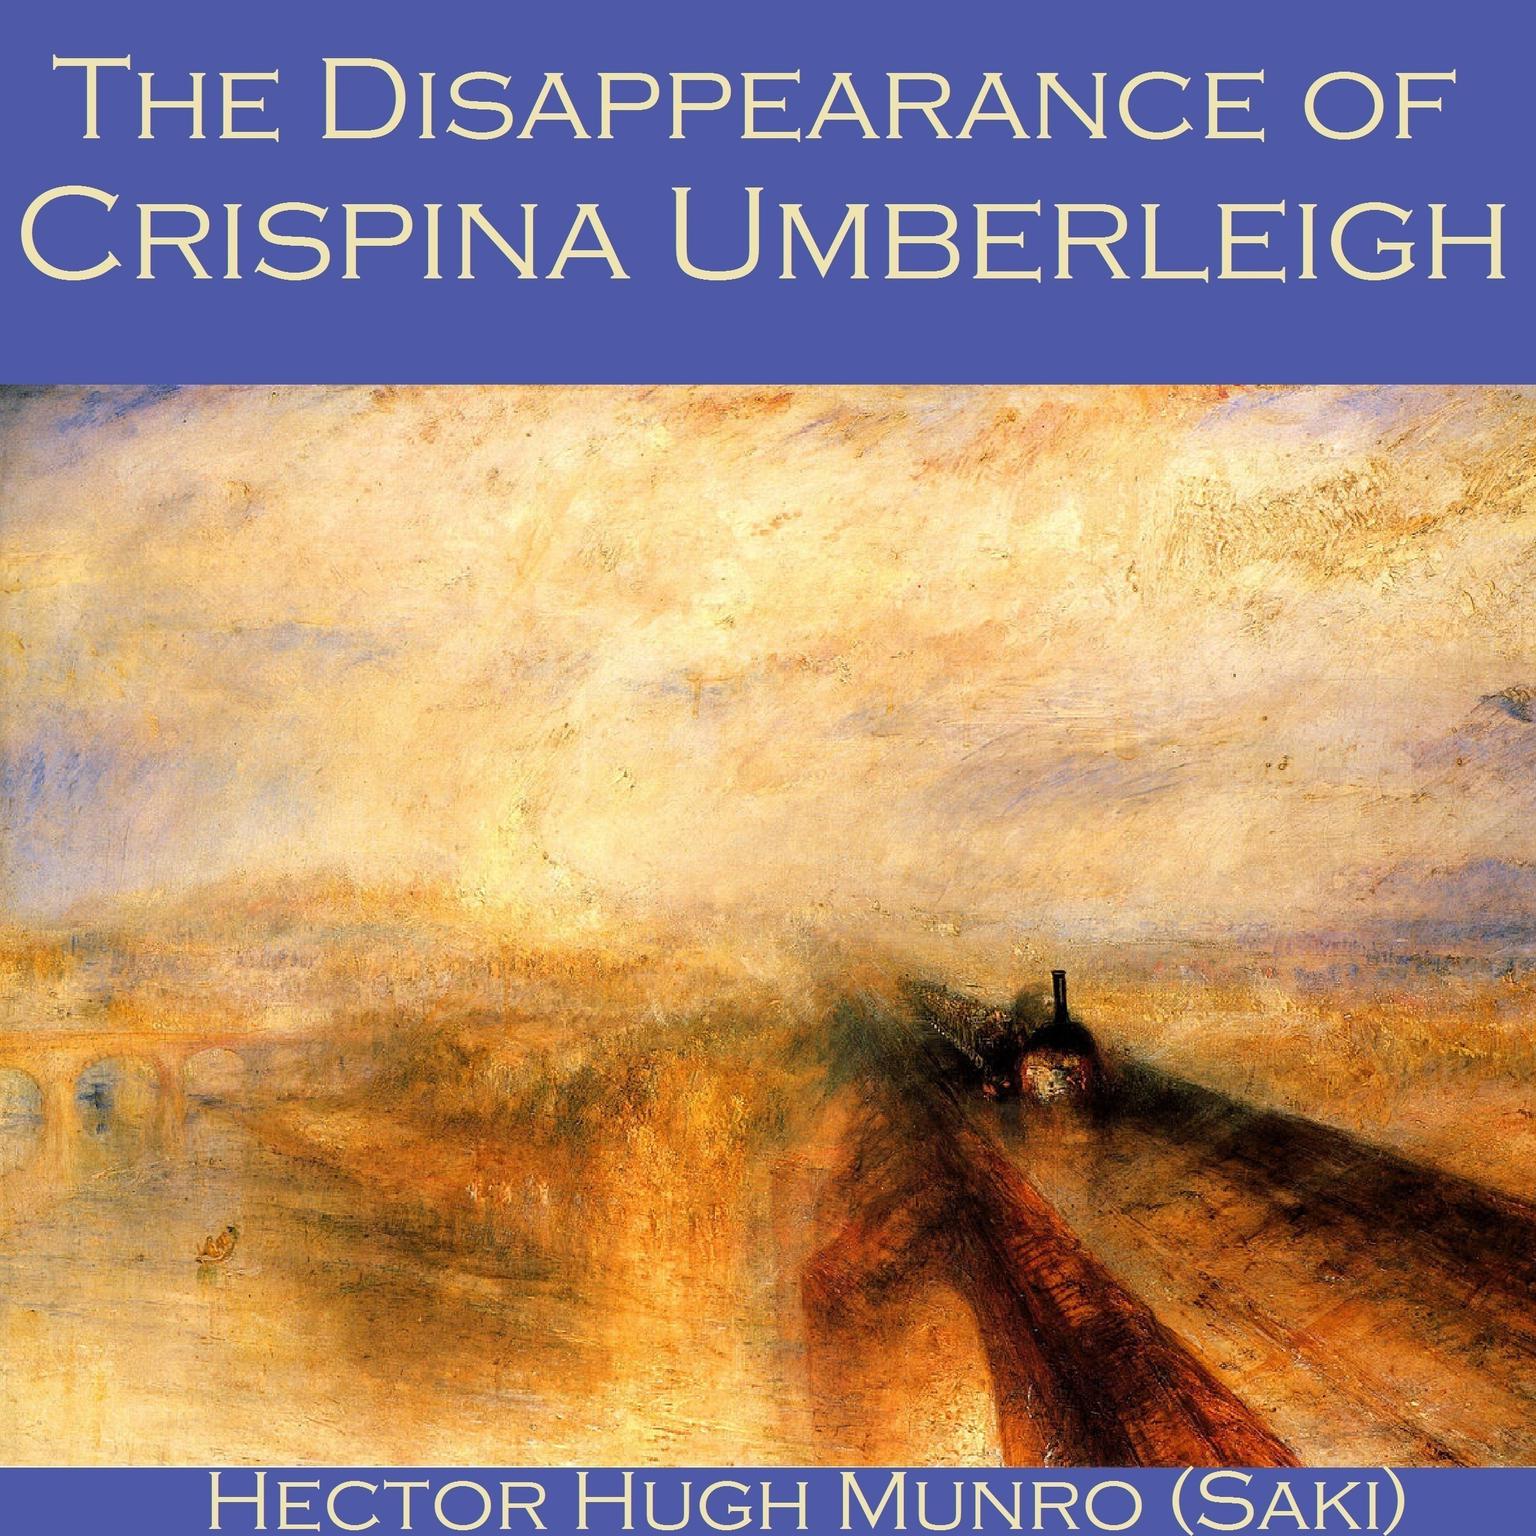 The Disappearance of Crispina Umberleigh Audiobook, by Hector Hugh Munro